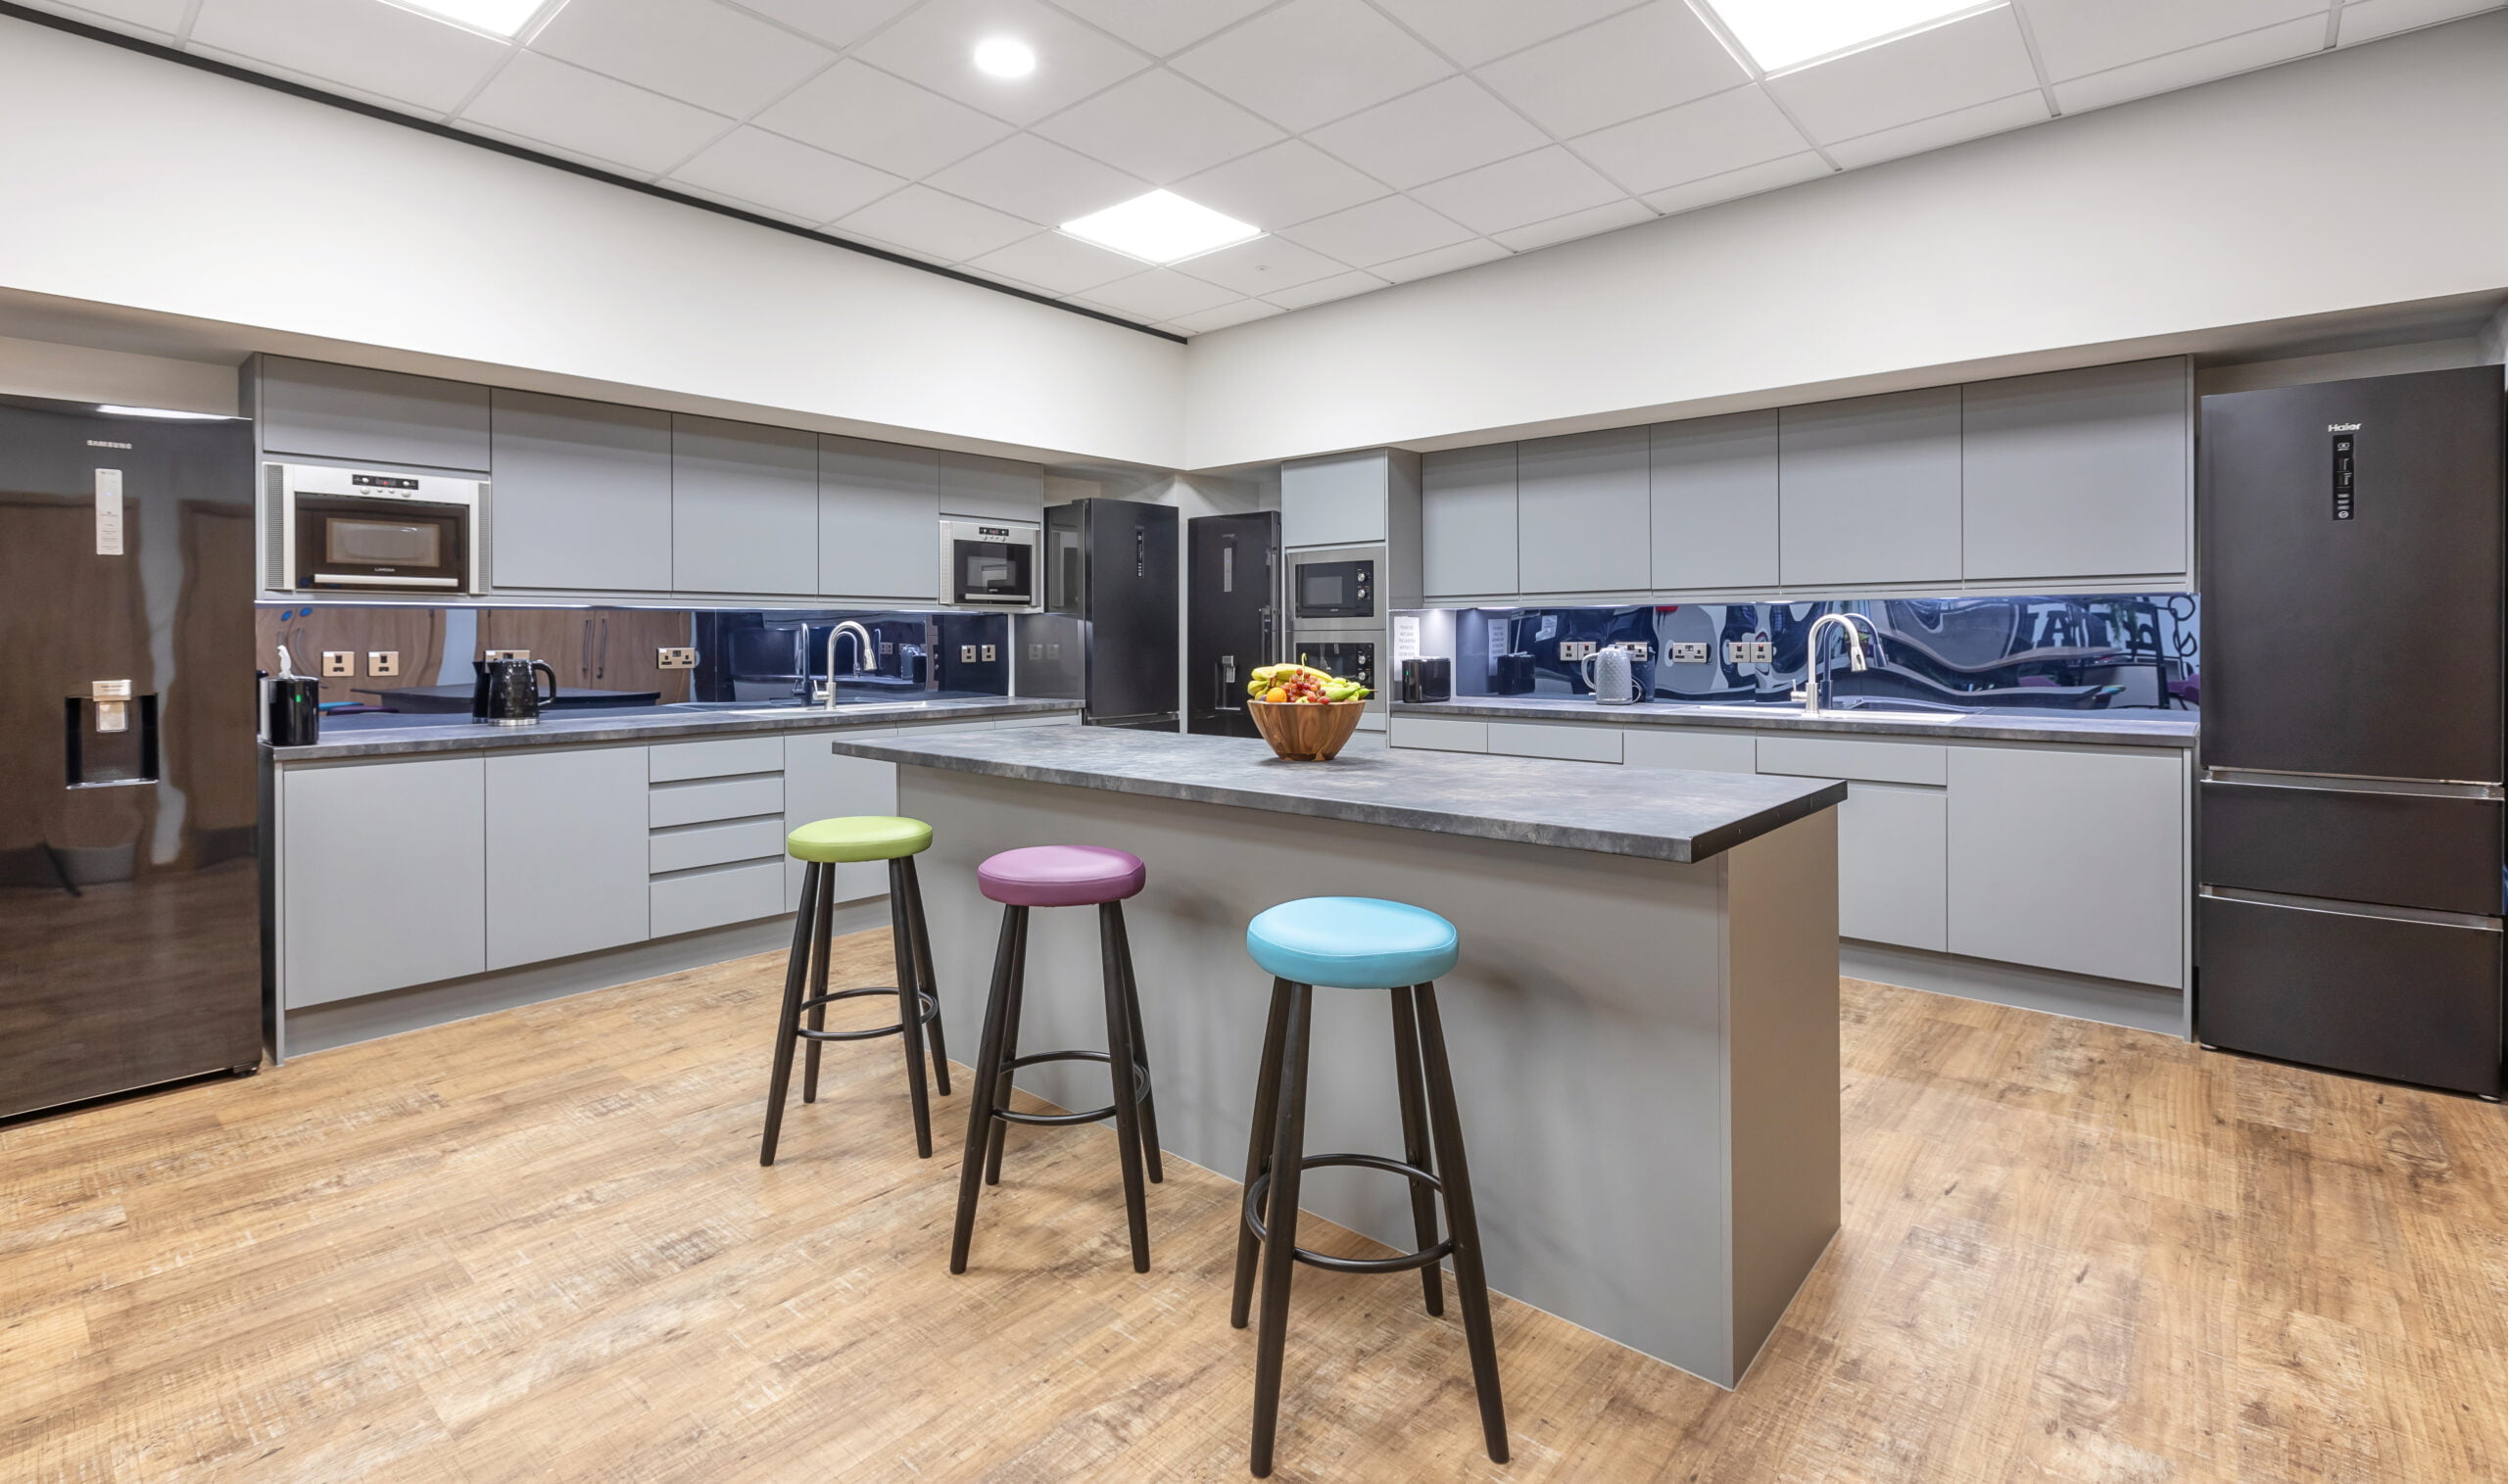 tea point/kitchenette space with colourful high bar stools